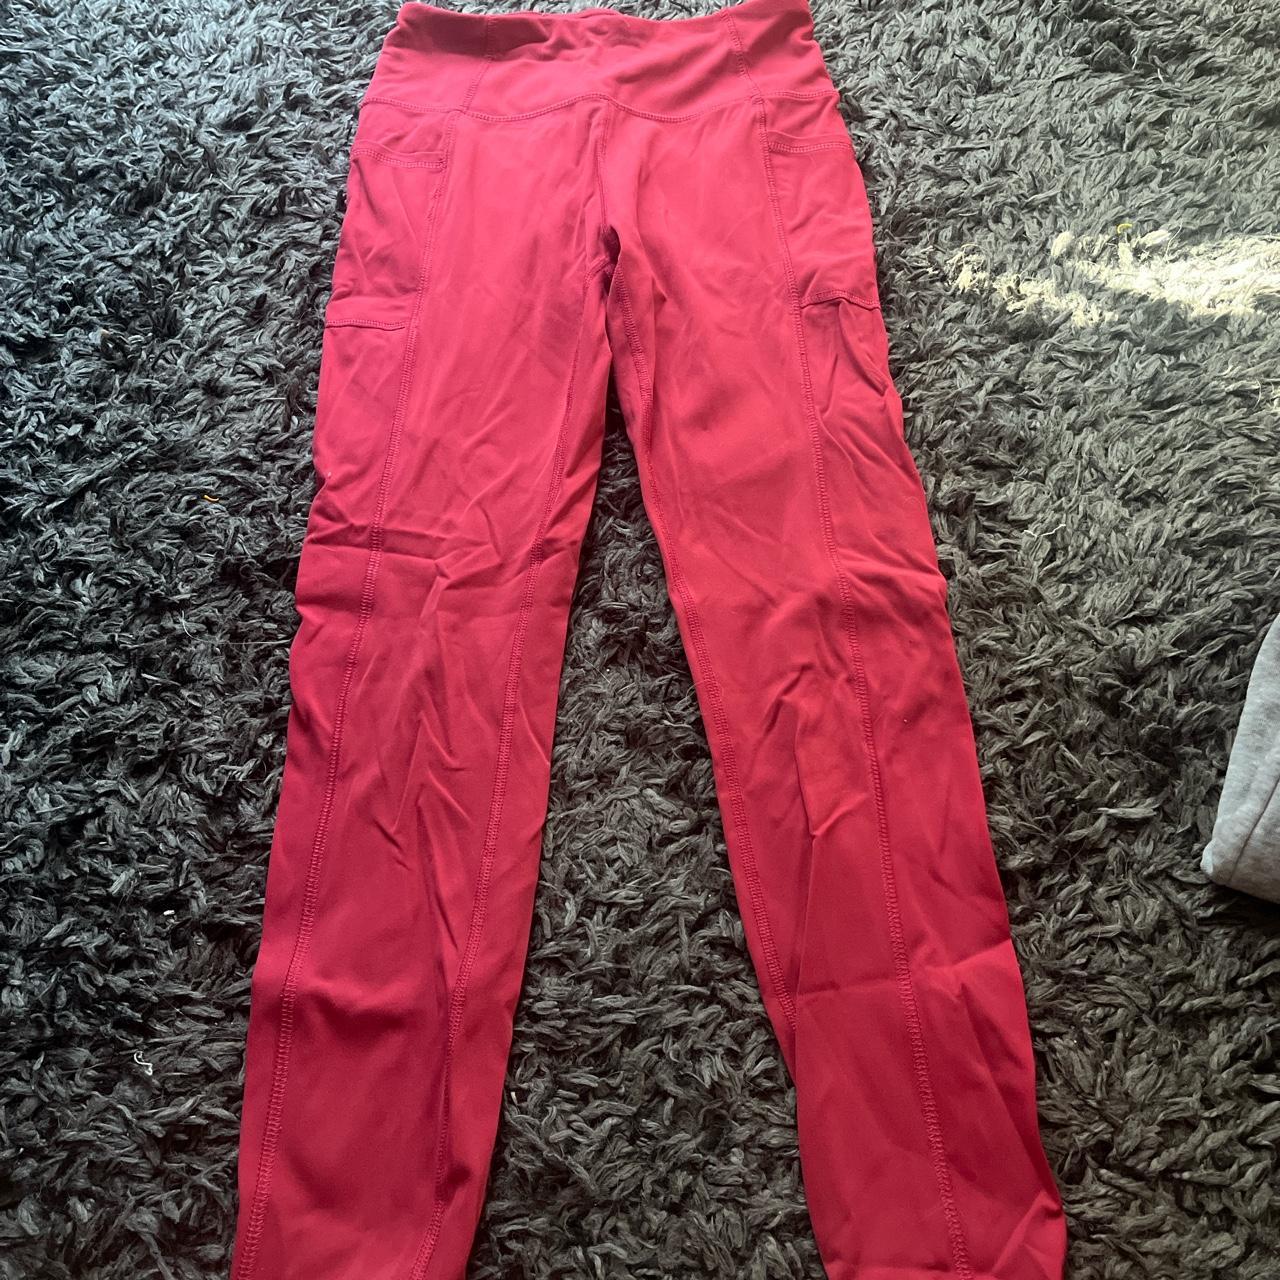 gottex leggings size xs feel and look exactly like - Depop